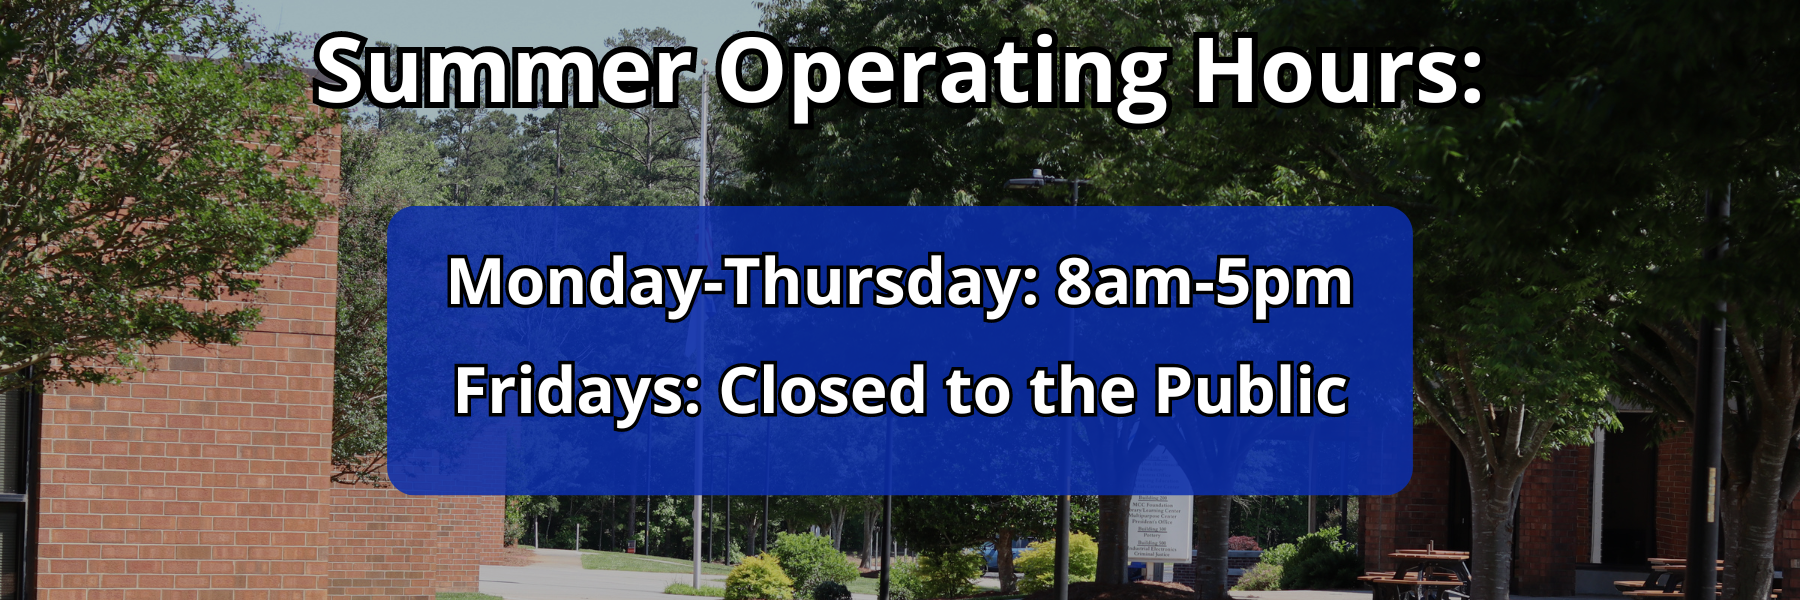 Summer Operating Hours Monday-Thursday 8am-5pm Friday Closed to the Public